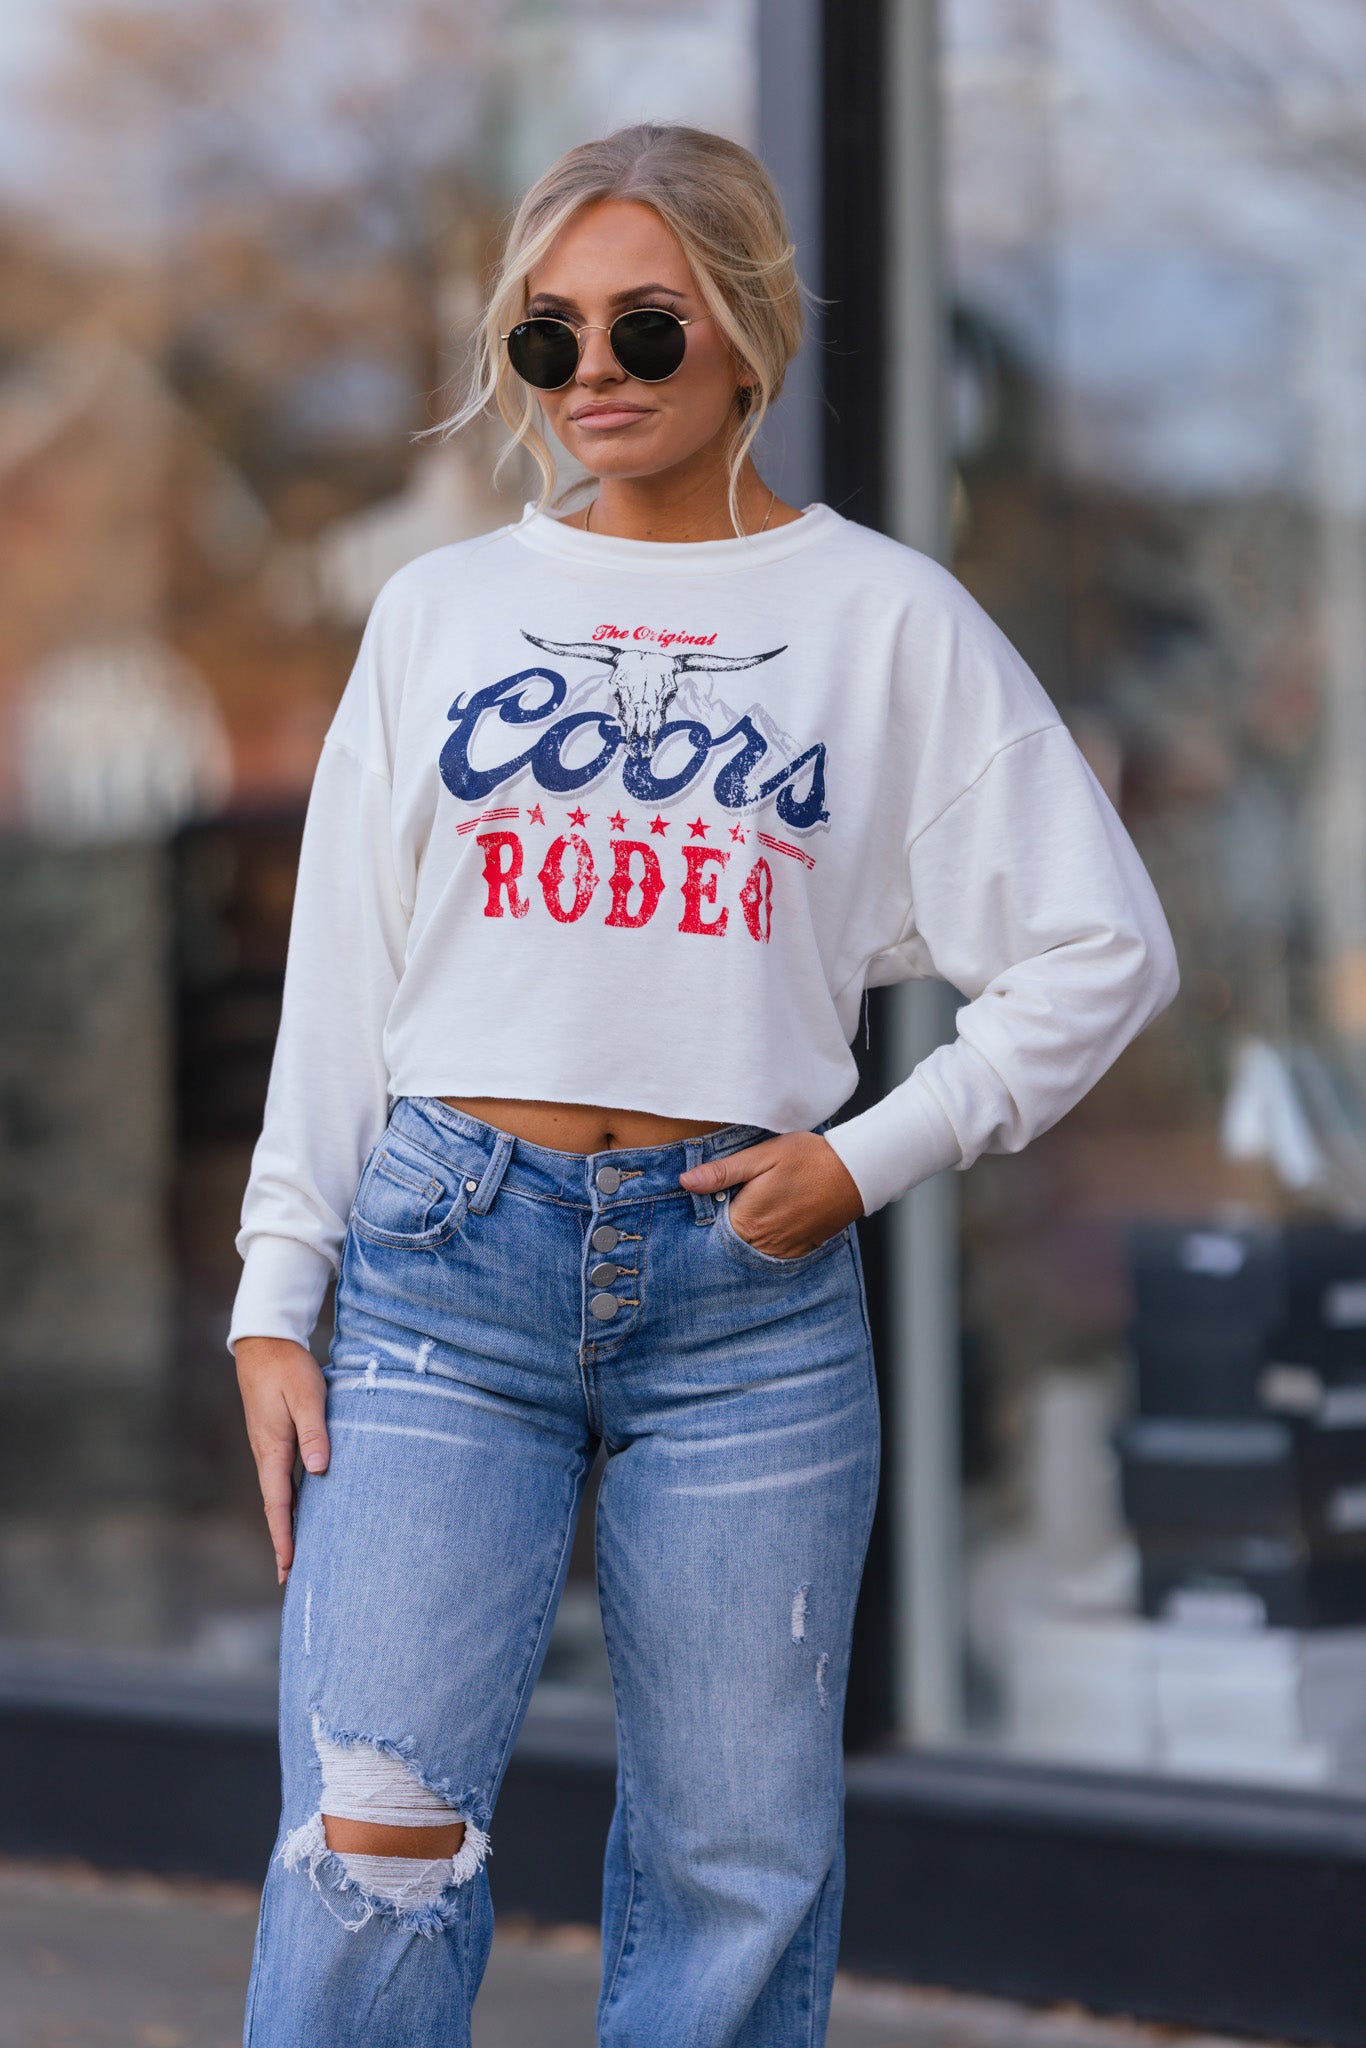 Coors Rodeo Long Sleeve Top